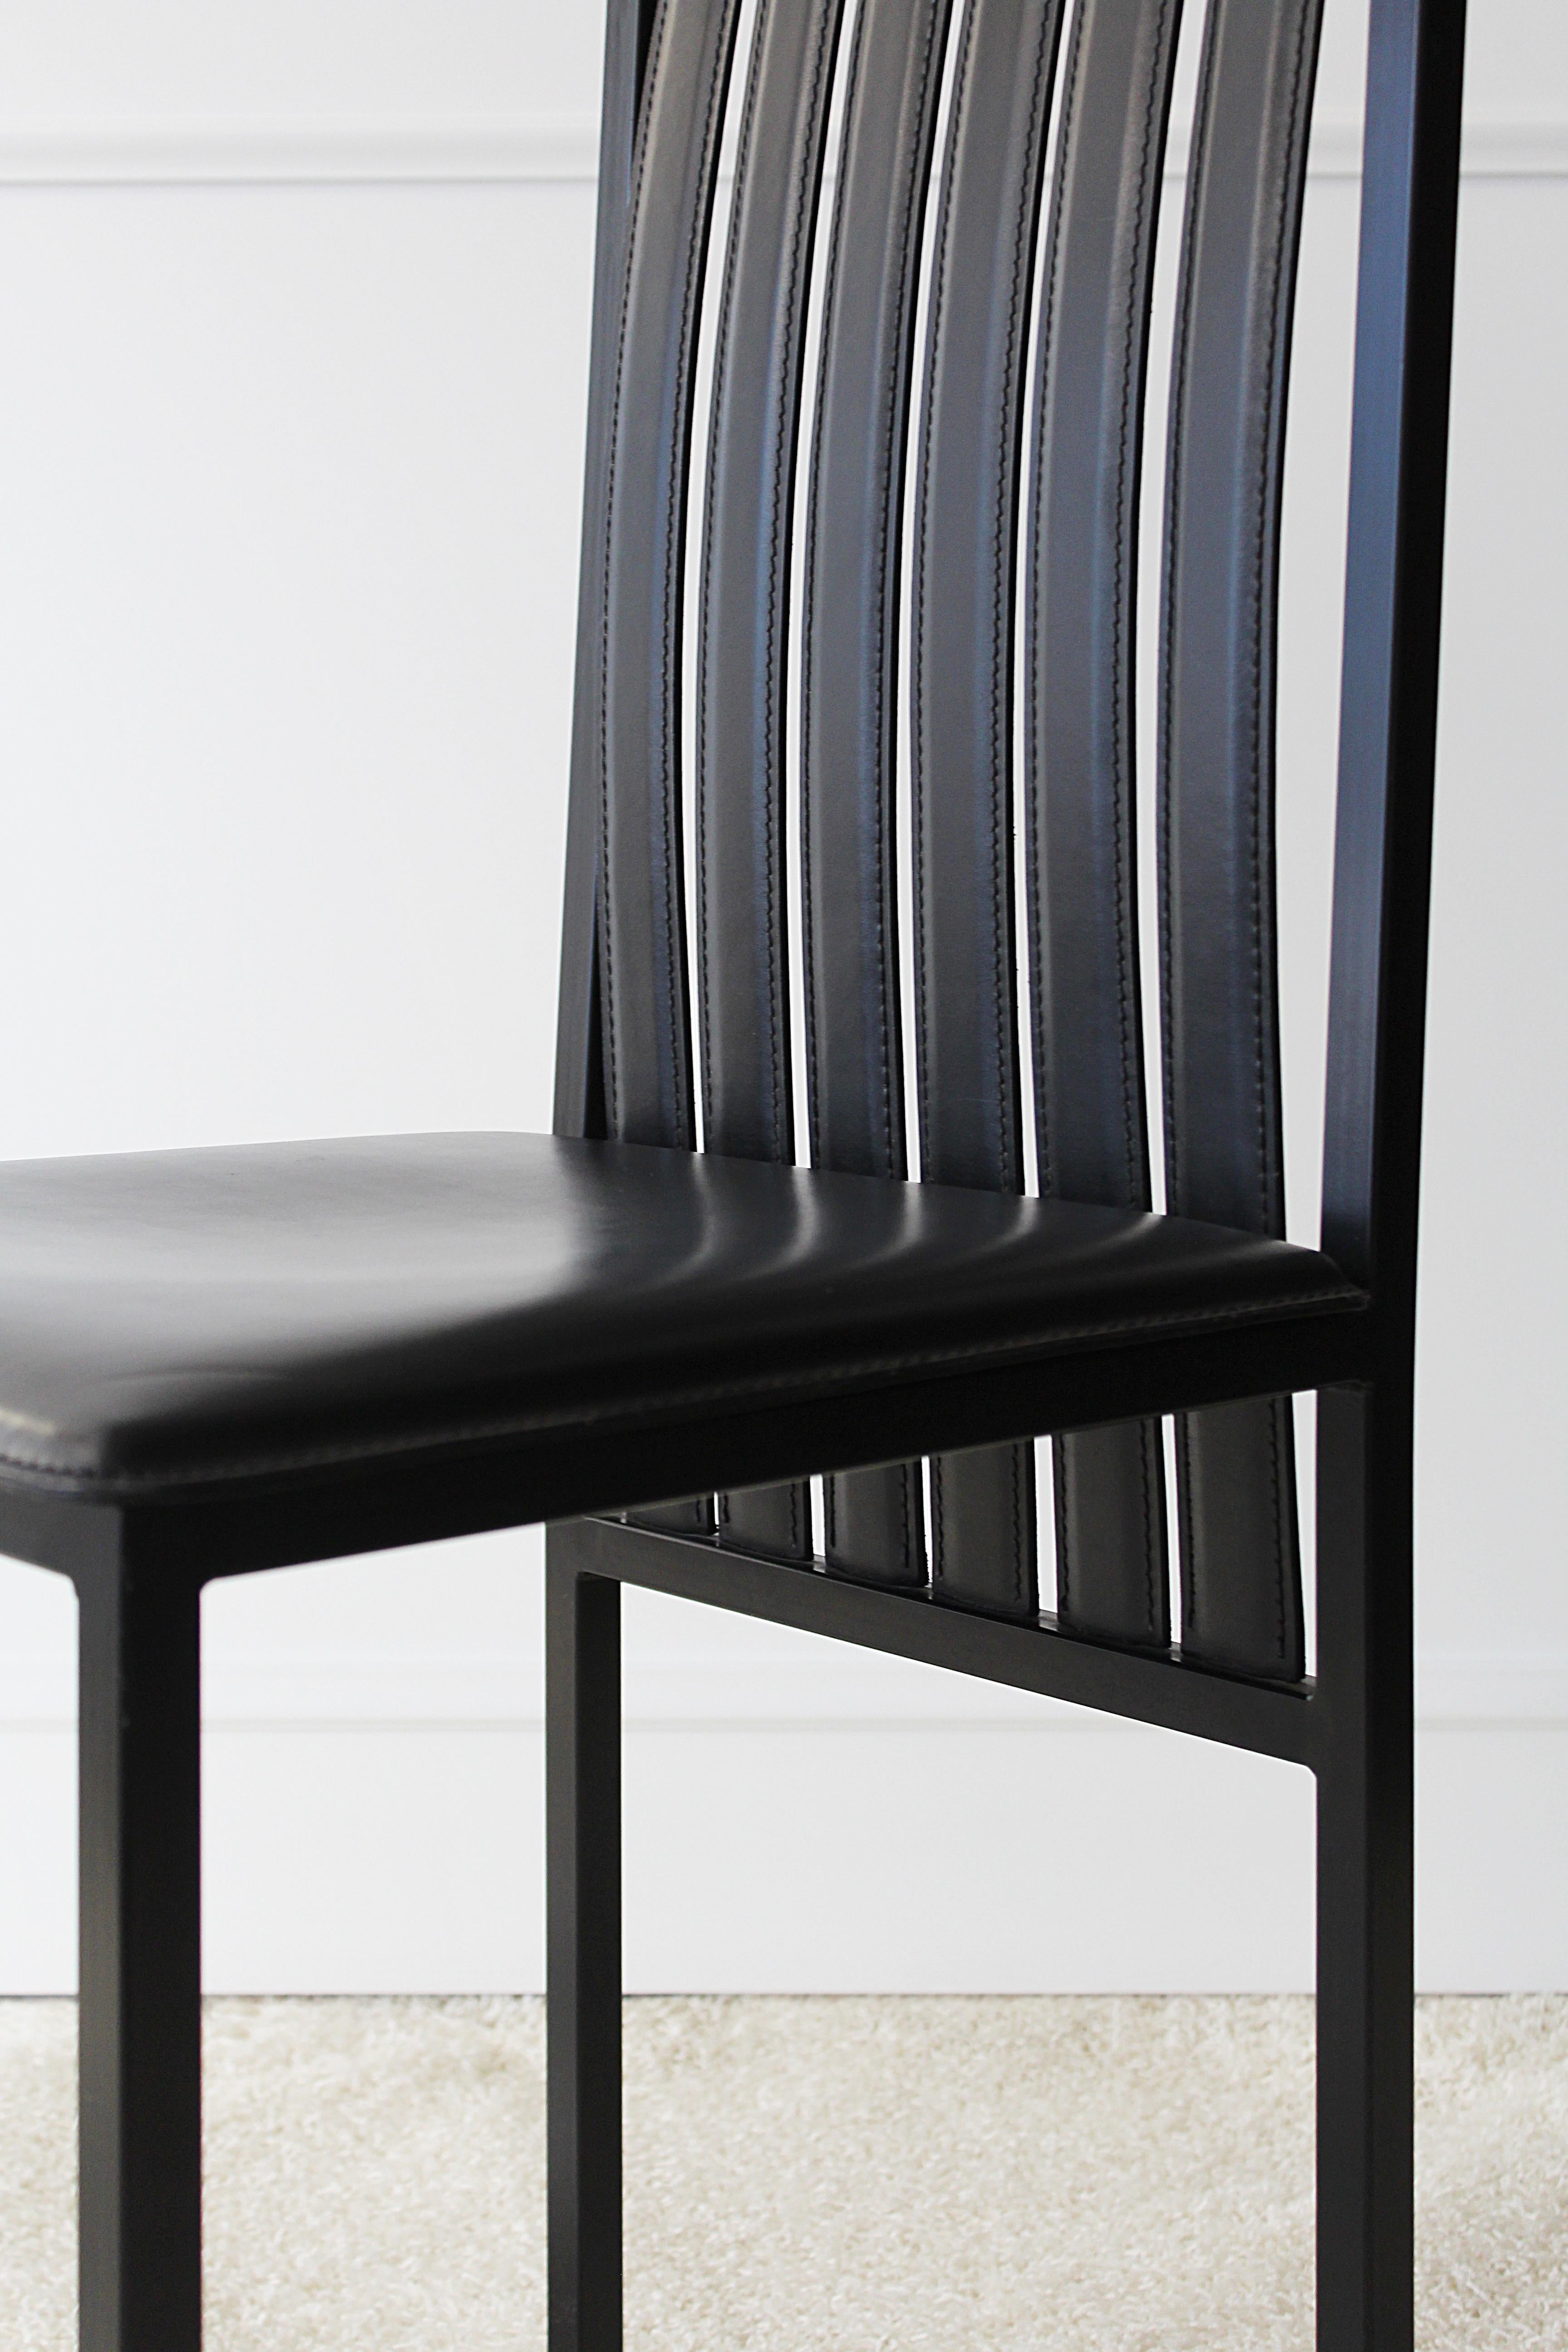 Italian 21st Century Frac Chair, Lacquered Iron and Black Leather, Made in Italy For Sale